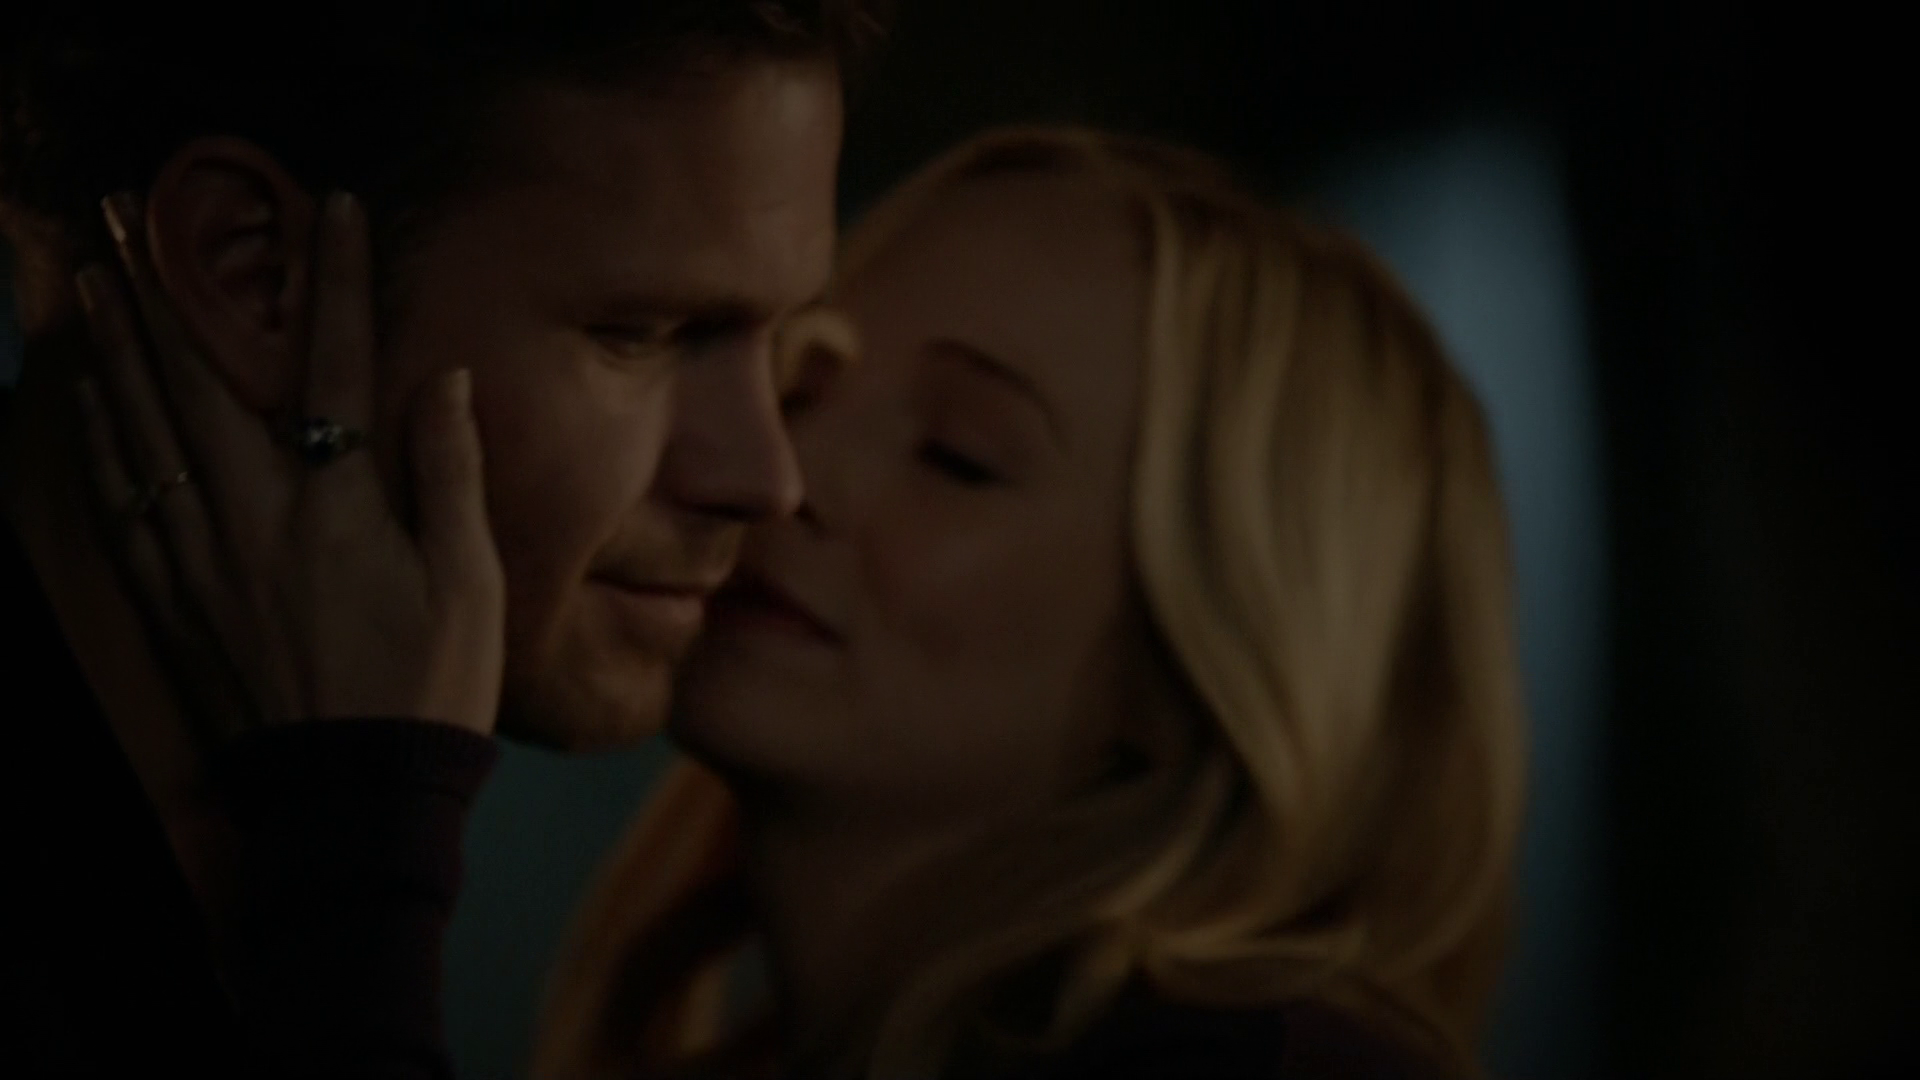 Alaric And Caroline The Vampire Diaries Wiki Fandom As the vampires and everything supernatural became mainstream, this show has taken the role of the primary supernatural medium for teens. alaric and caroline the vampire